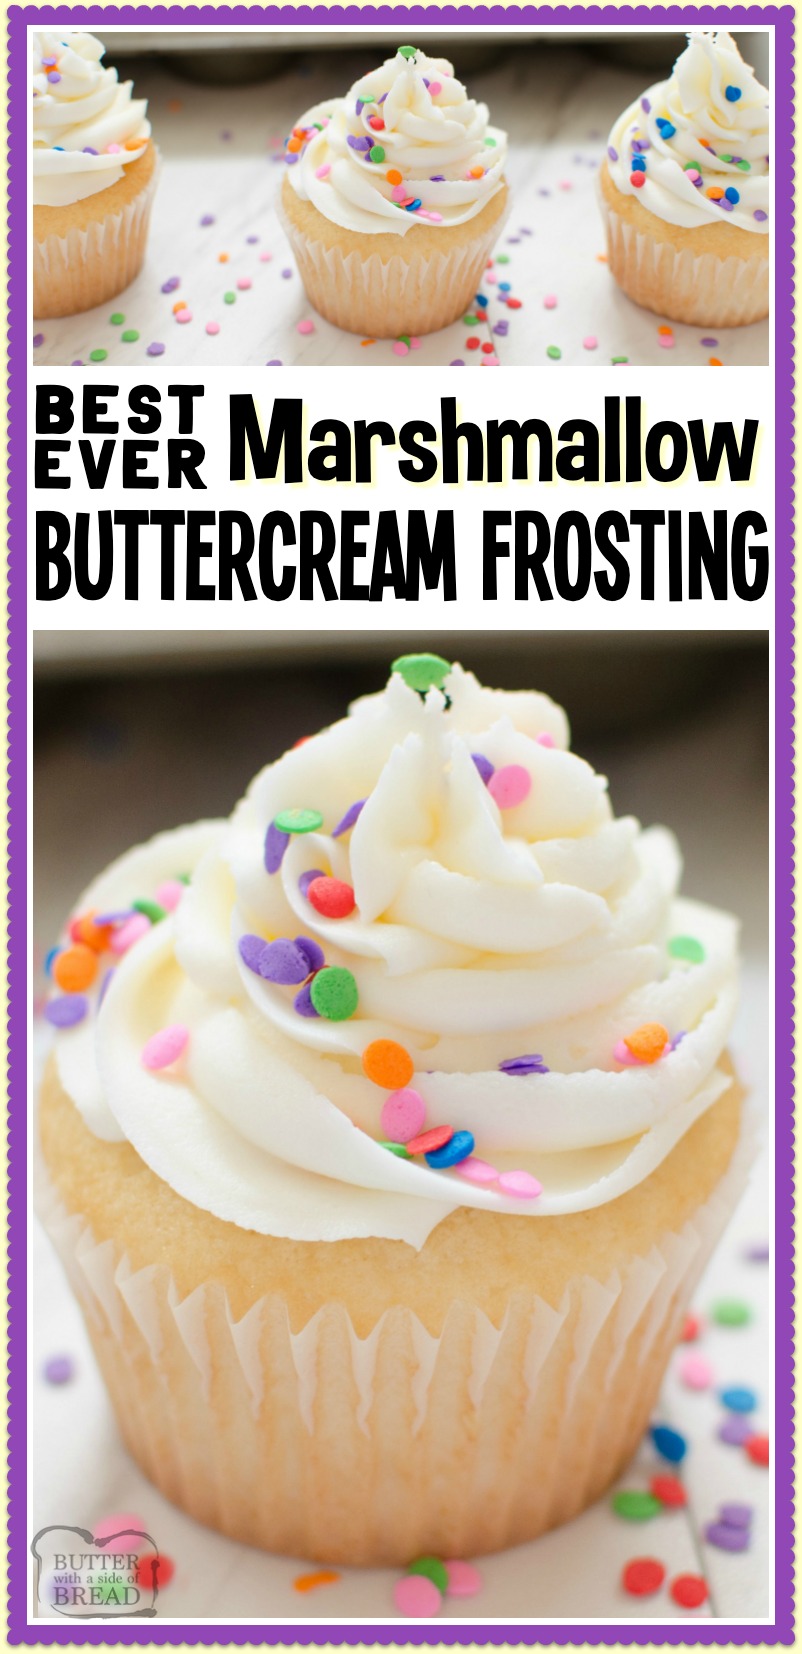 Best Ever Marshmallow Buttercream Frosting is the most delicious homemade buttercream frosting recipe you'll ever taste! Made in minutes with just 5 ingredients; everyone adores this marshmallow buttercream recipe.